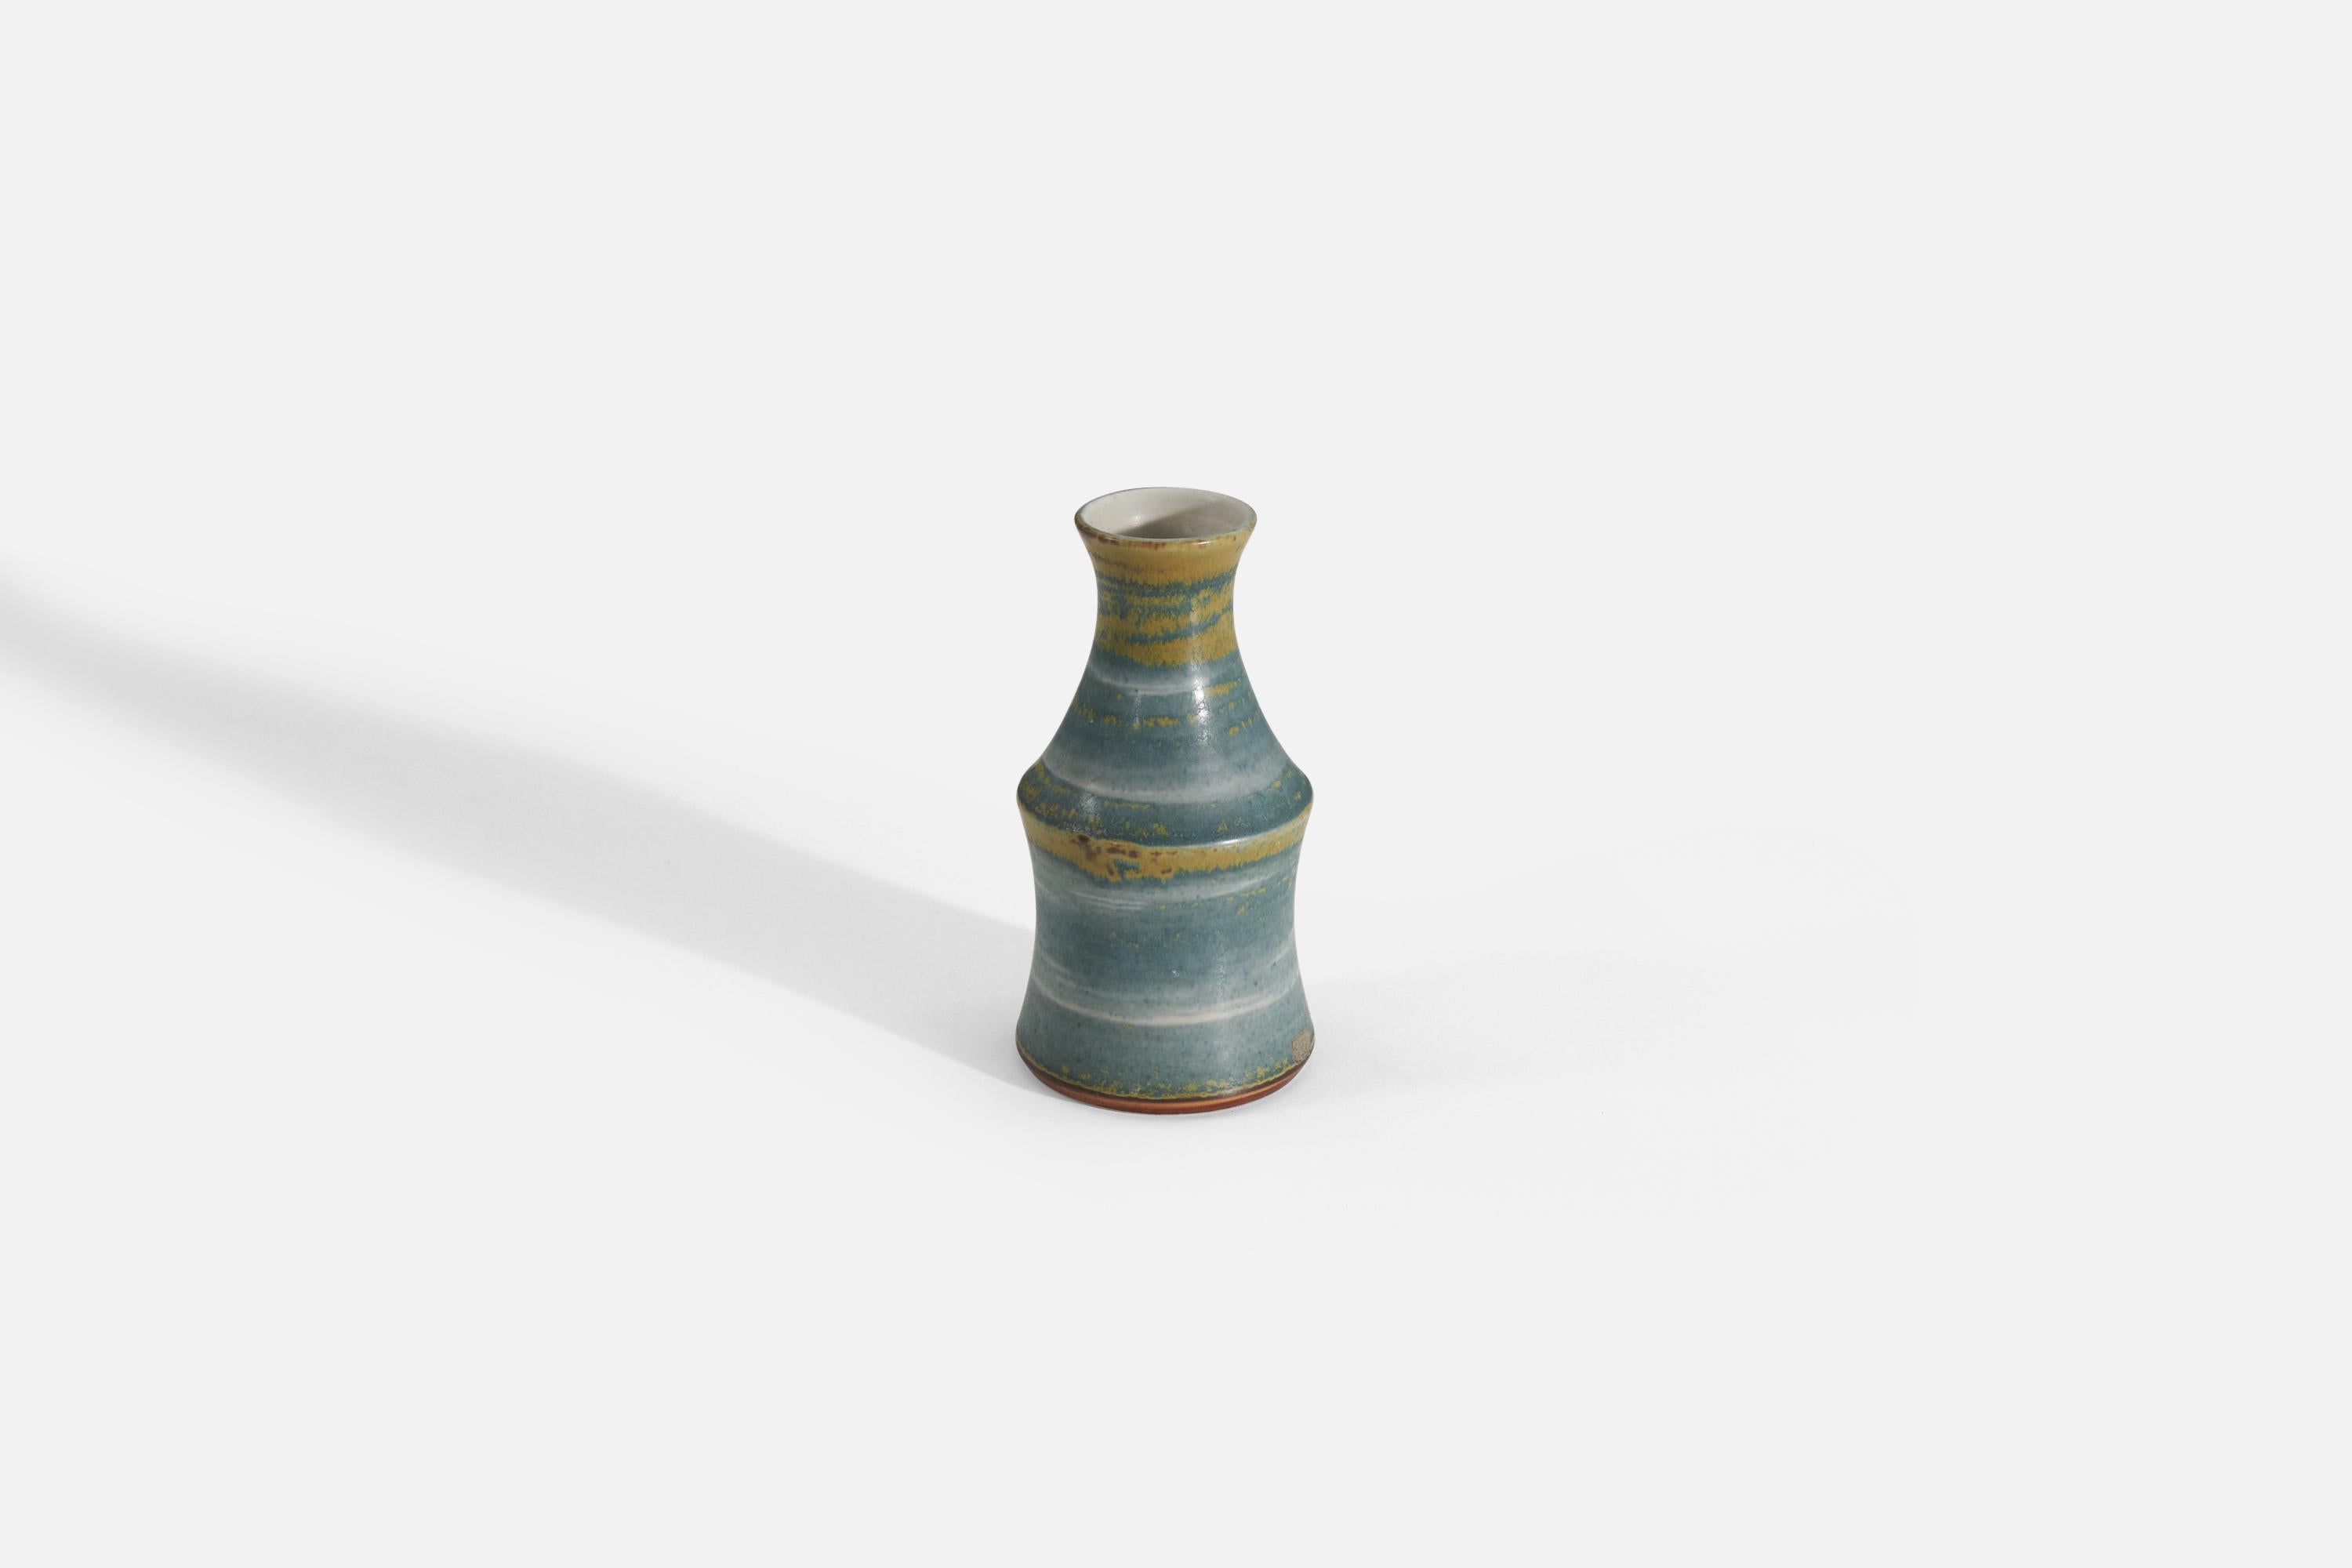 A blue and yellow glazed stoneware vase designed by John Andersson, for Höganäs Keramik, Sweden, c. 1950s-1960s.